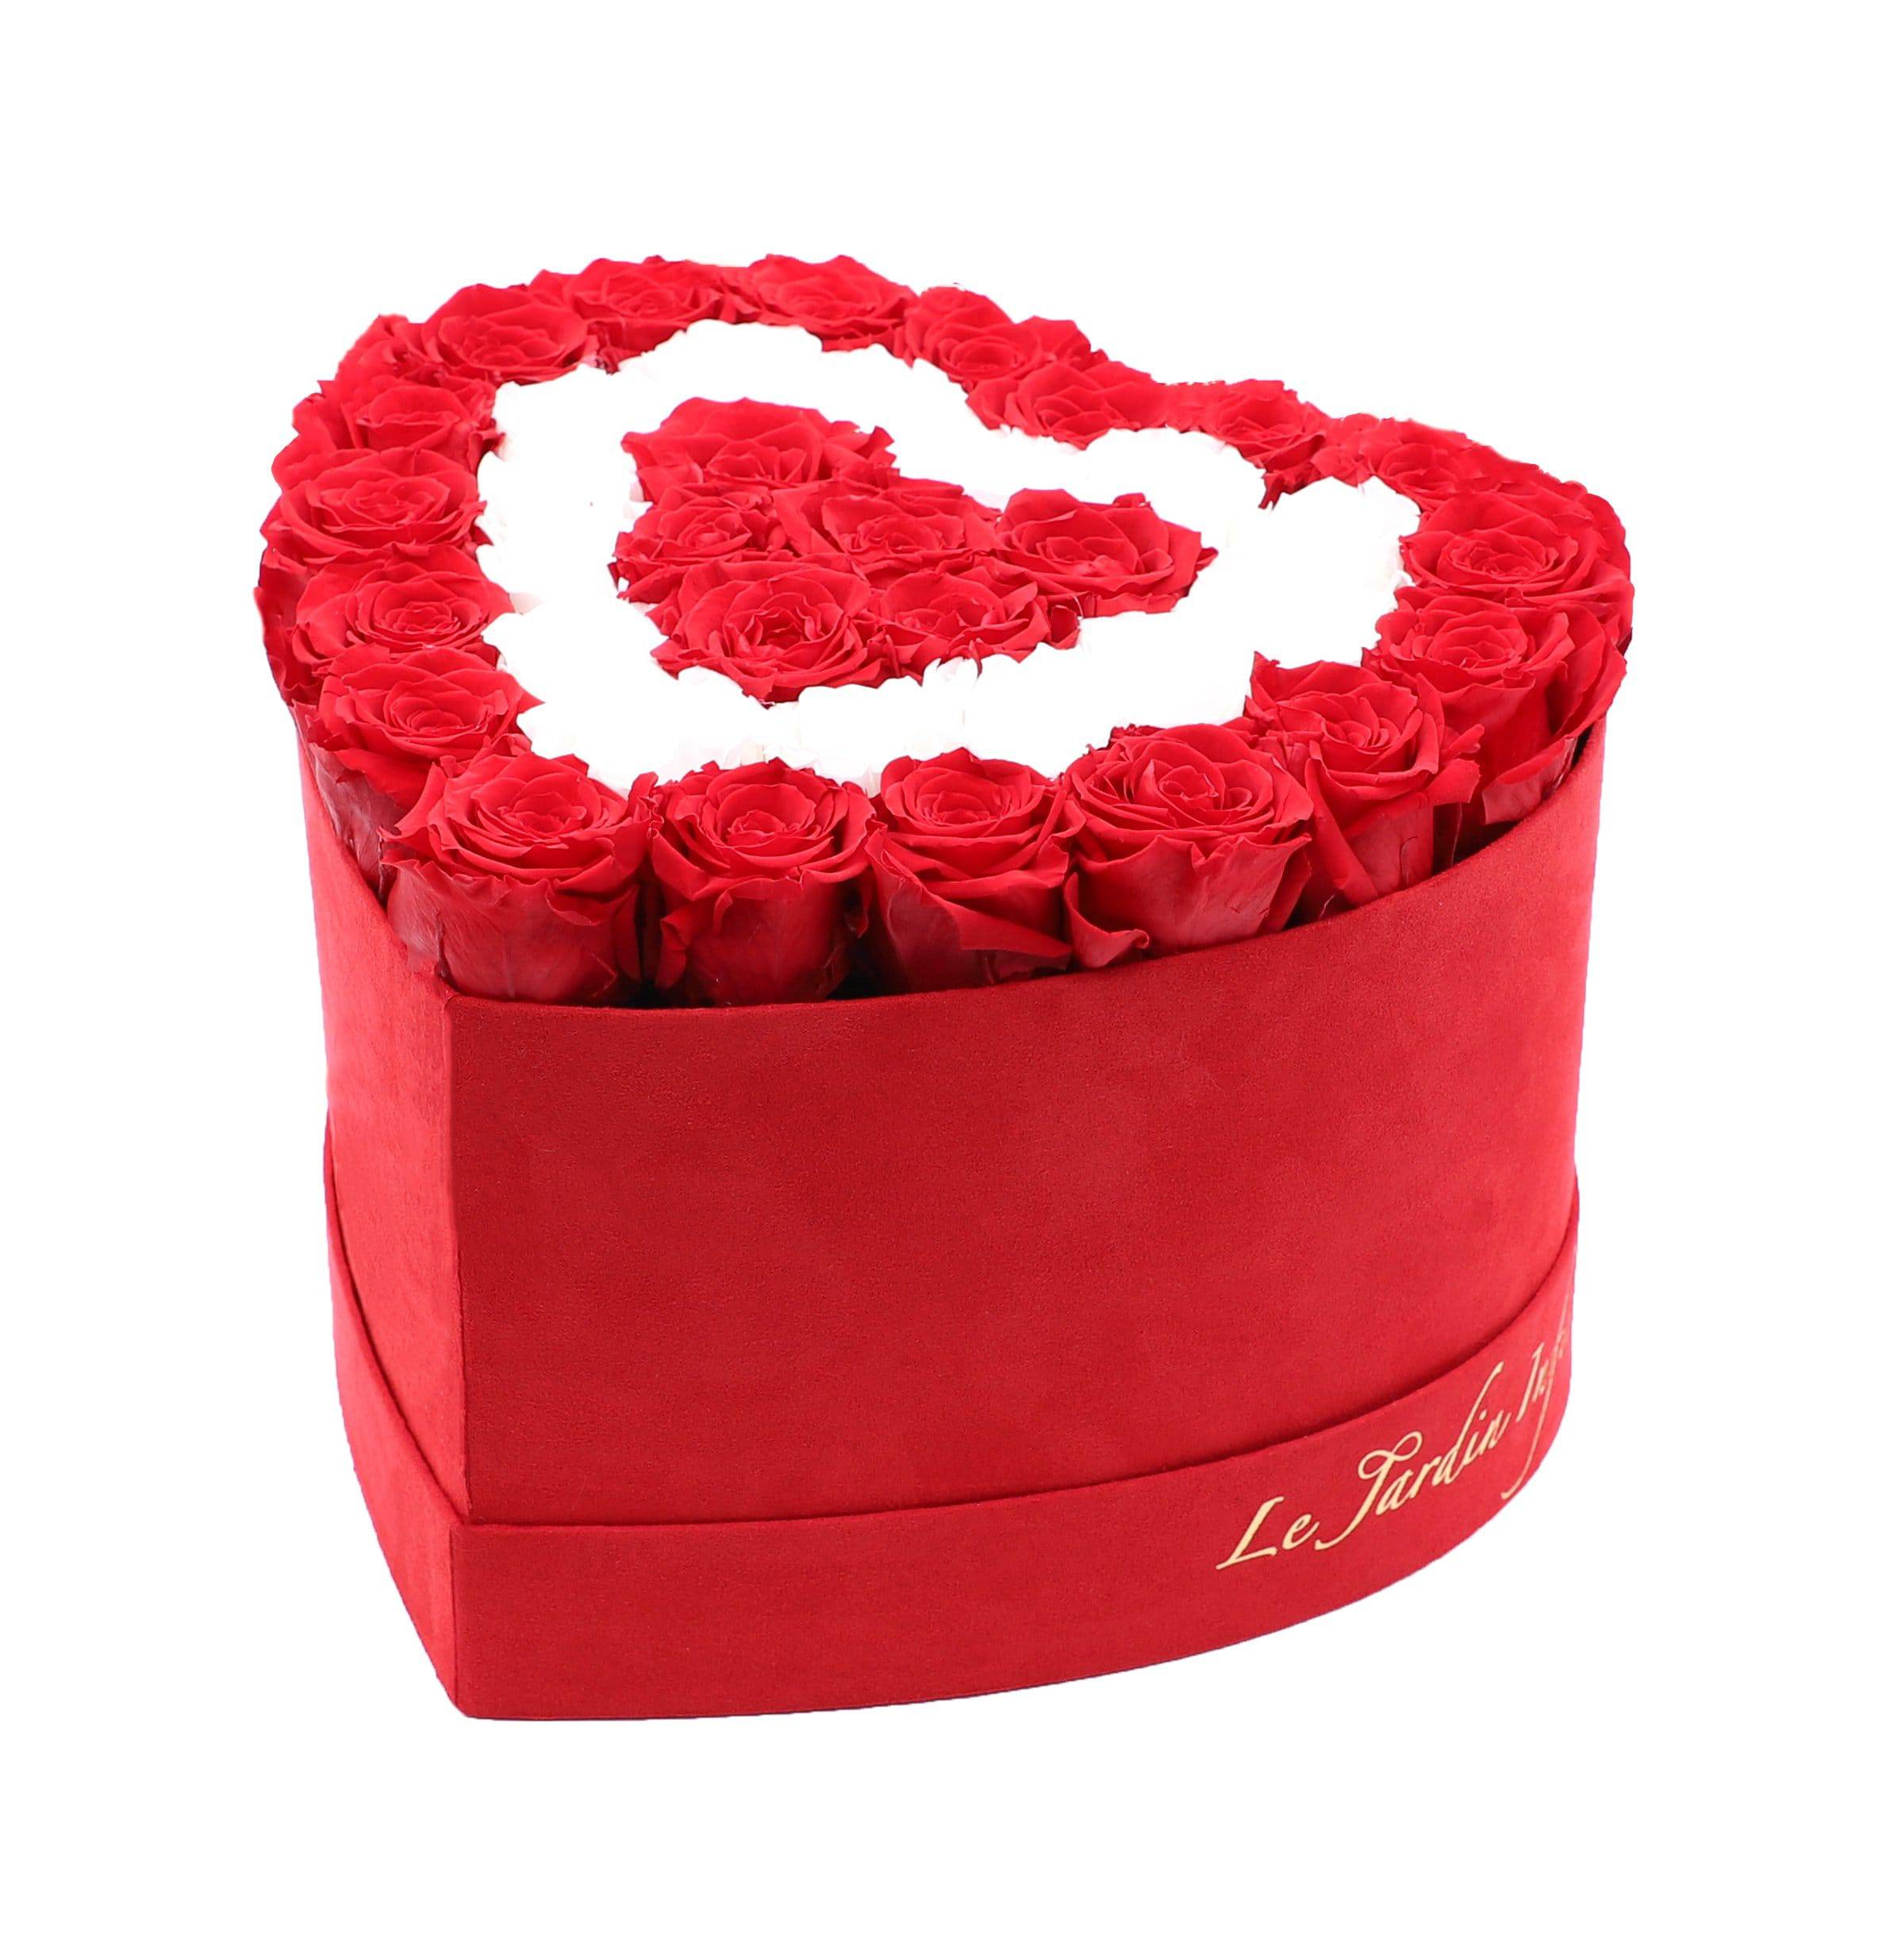 Flowers for Mother’s Day delivery 36 Red & White Hearts in A Heart Shaped Box- Small Heart Luxury Red Suede Box